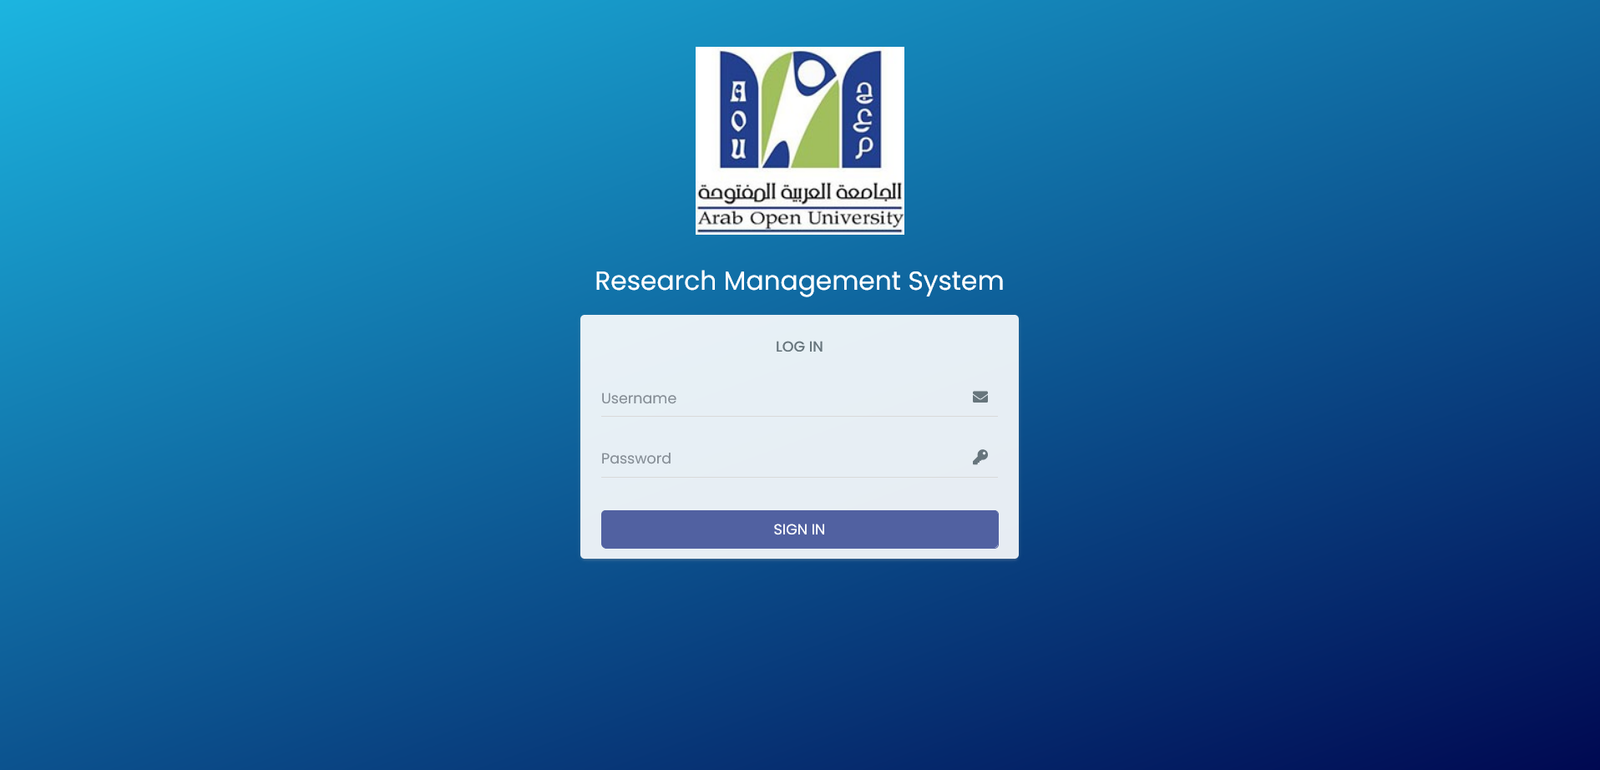 Research Management System